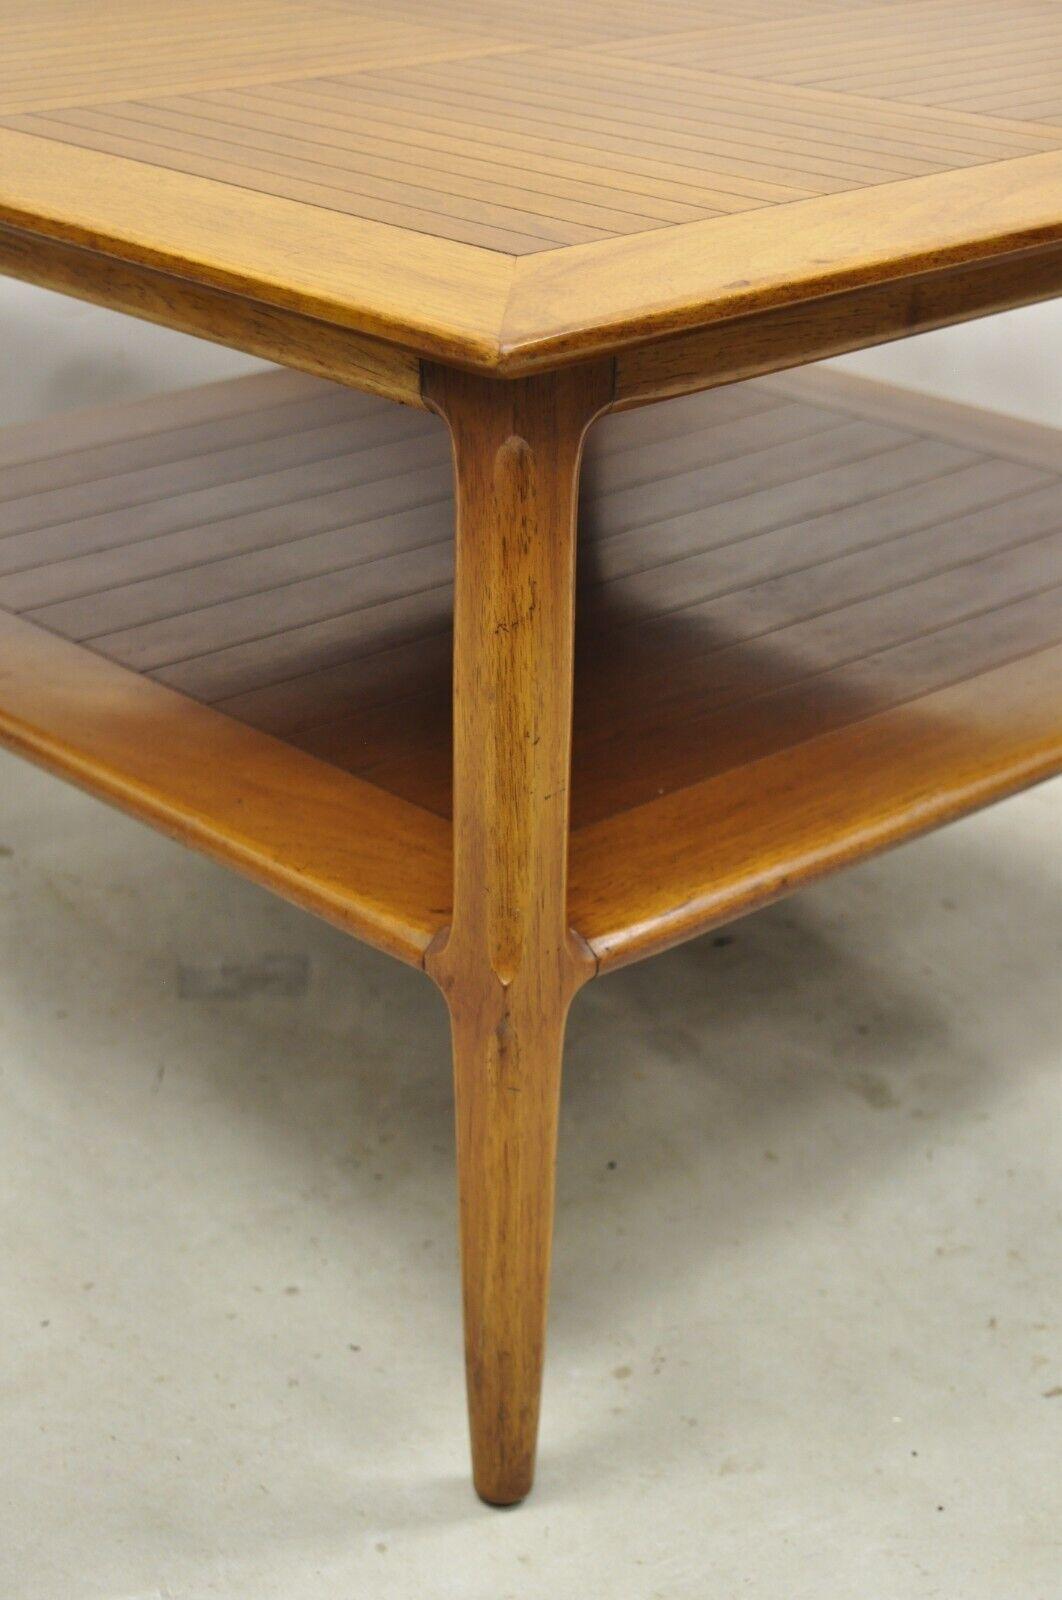 Vintage Tomlinson Sophisticate Square Walnut Mid Century Modern Lamp Side Table In Good Condition For Sale In Philadelphia, PA